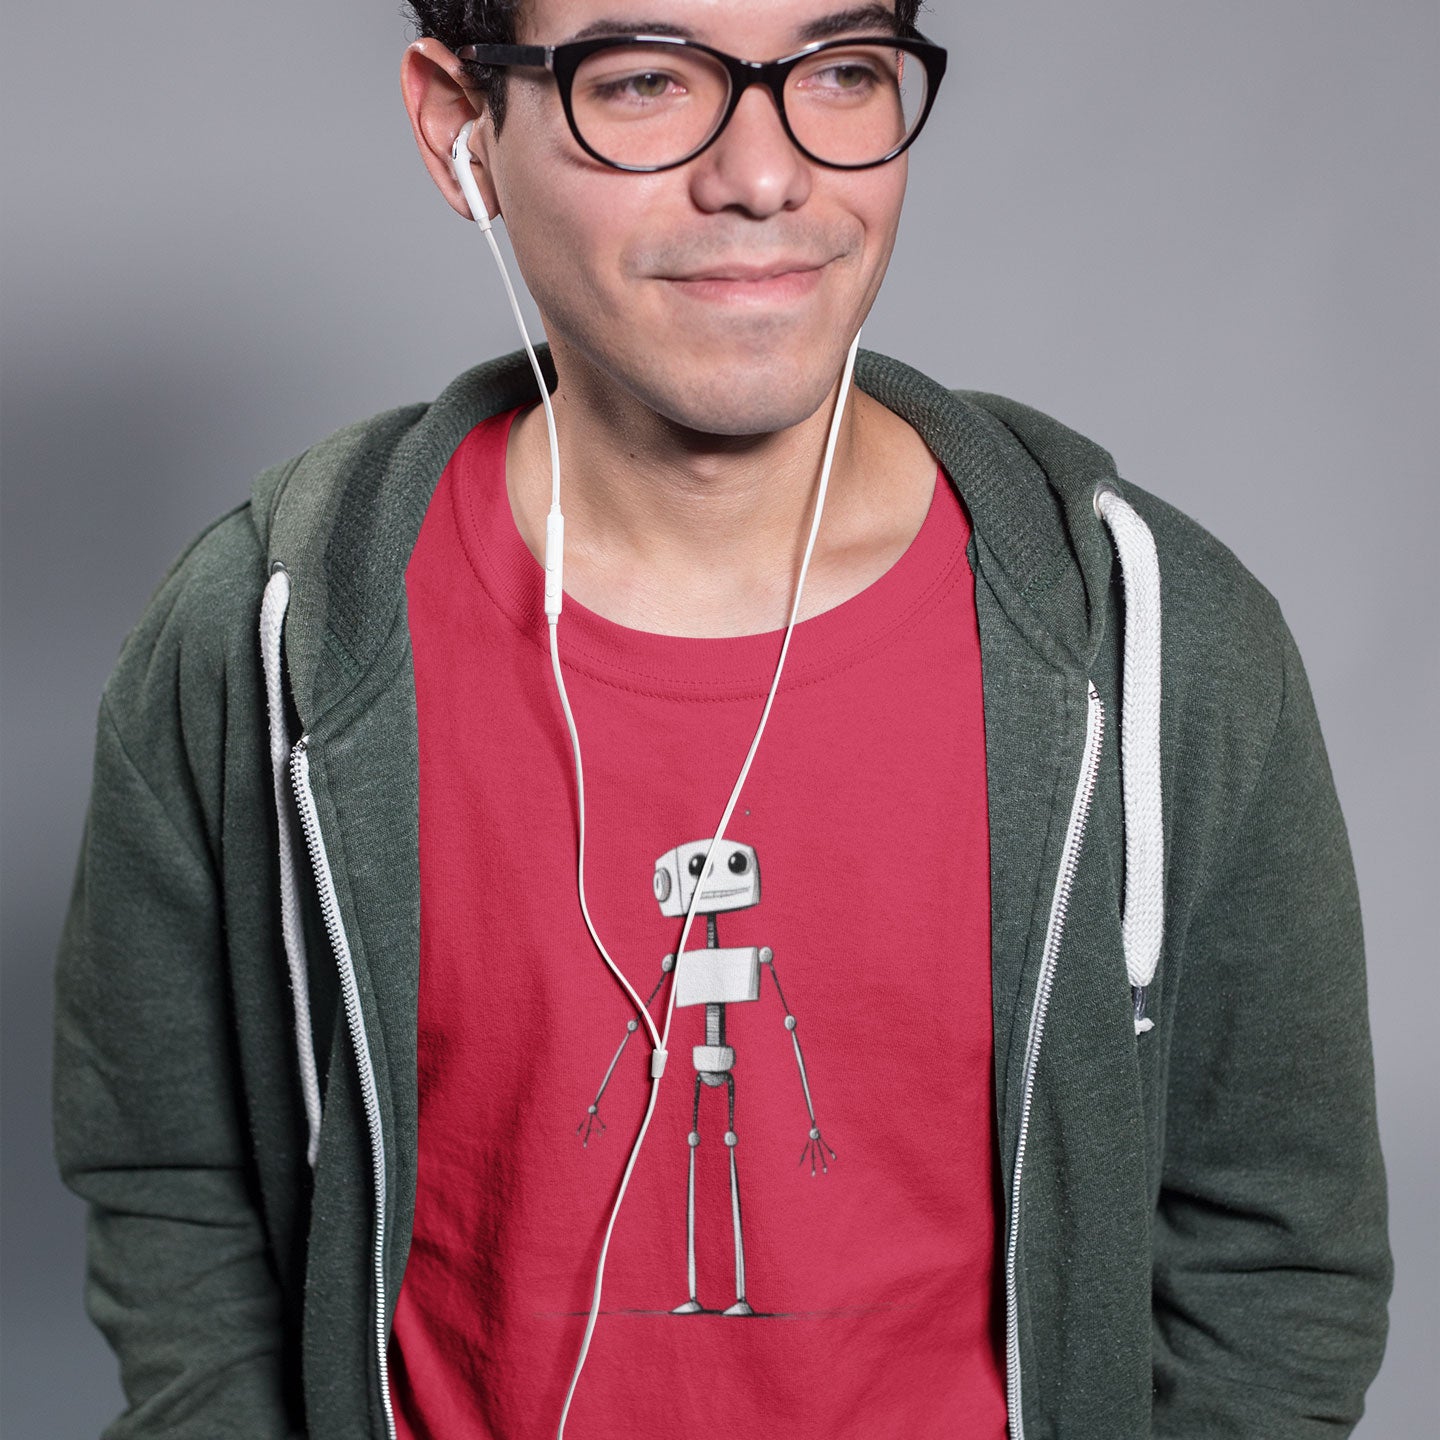 guy wearing a red t-shirt with smiling robot illustration